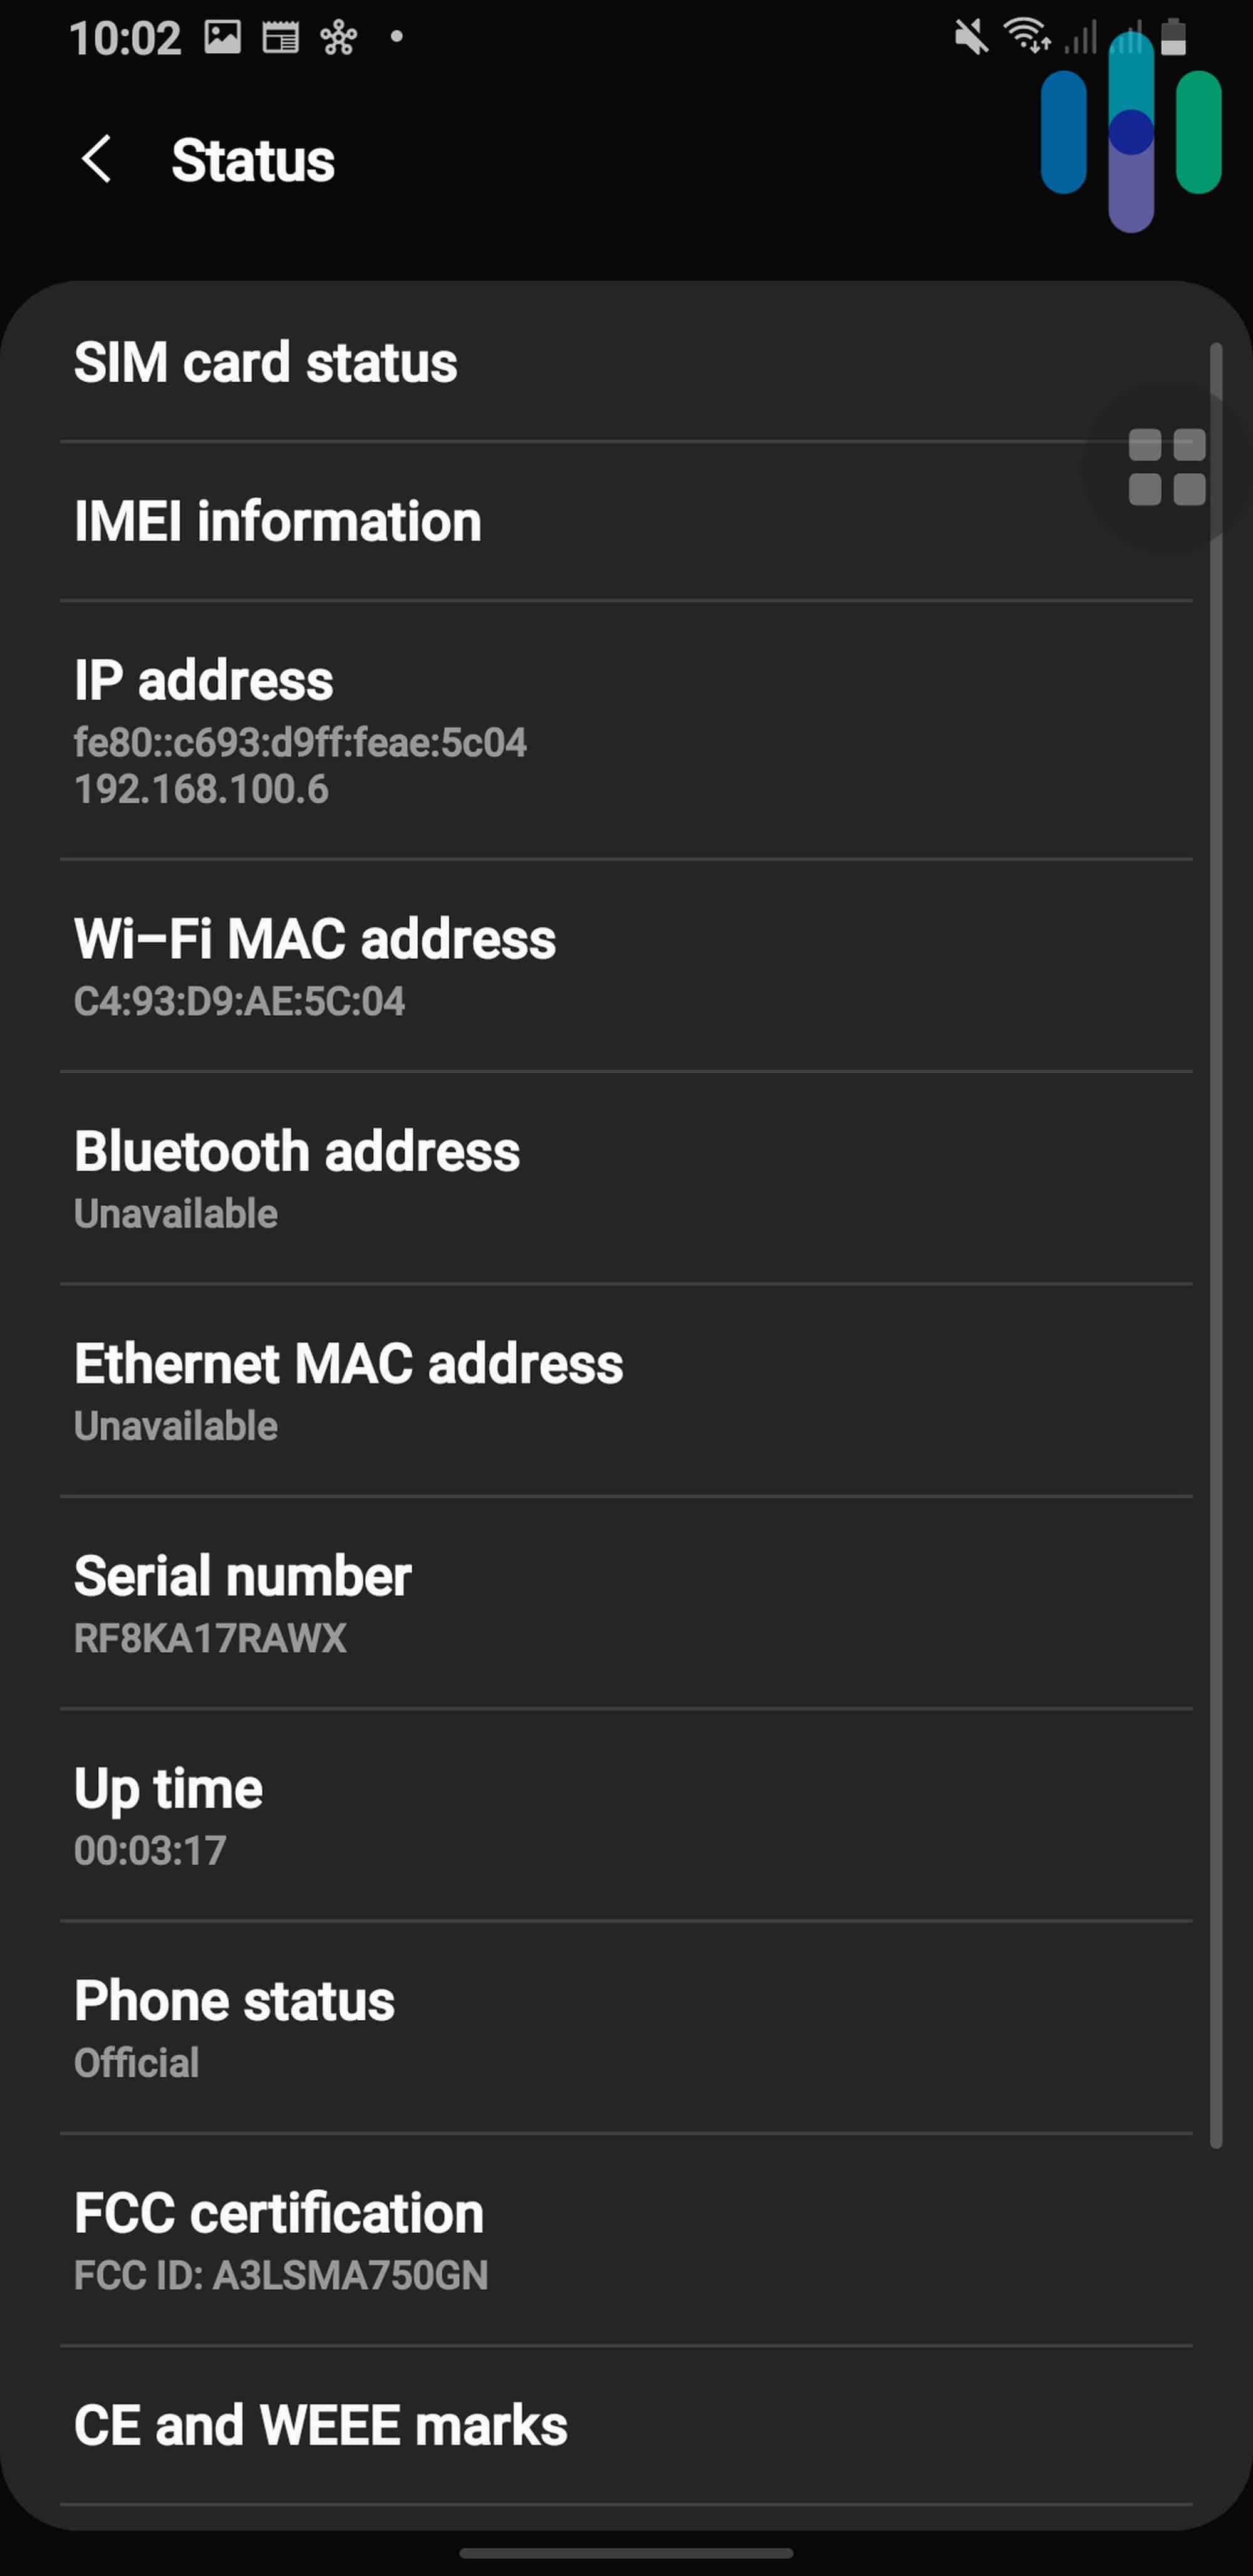 Changing Your IP - On Android, Scroll to IP address to see your IP address.